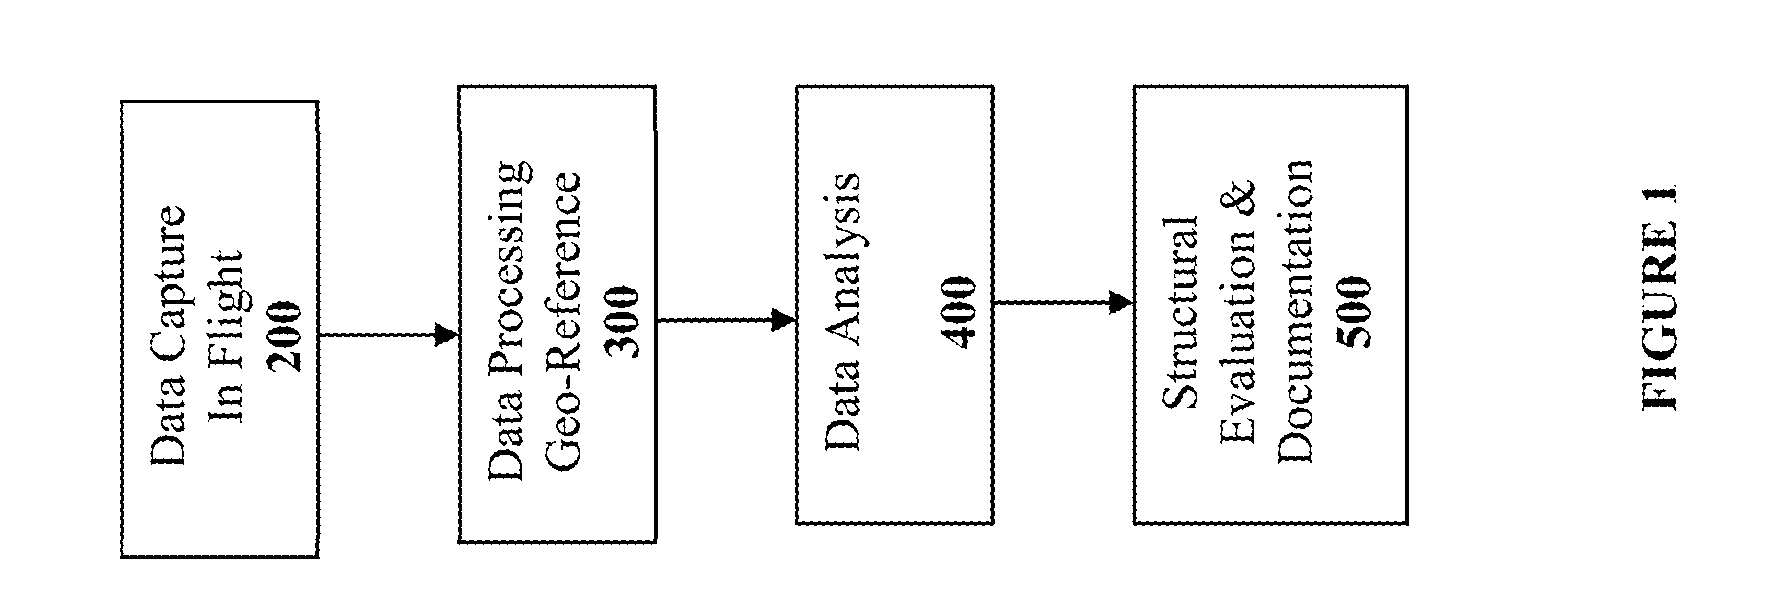 Method and system for remotely inspecting bridges and other structures